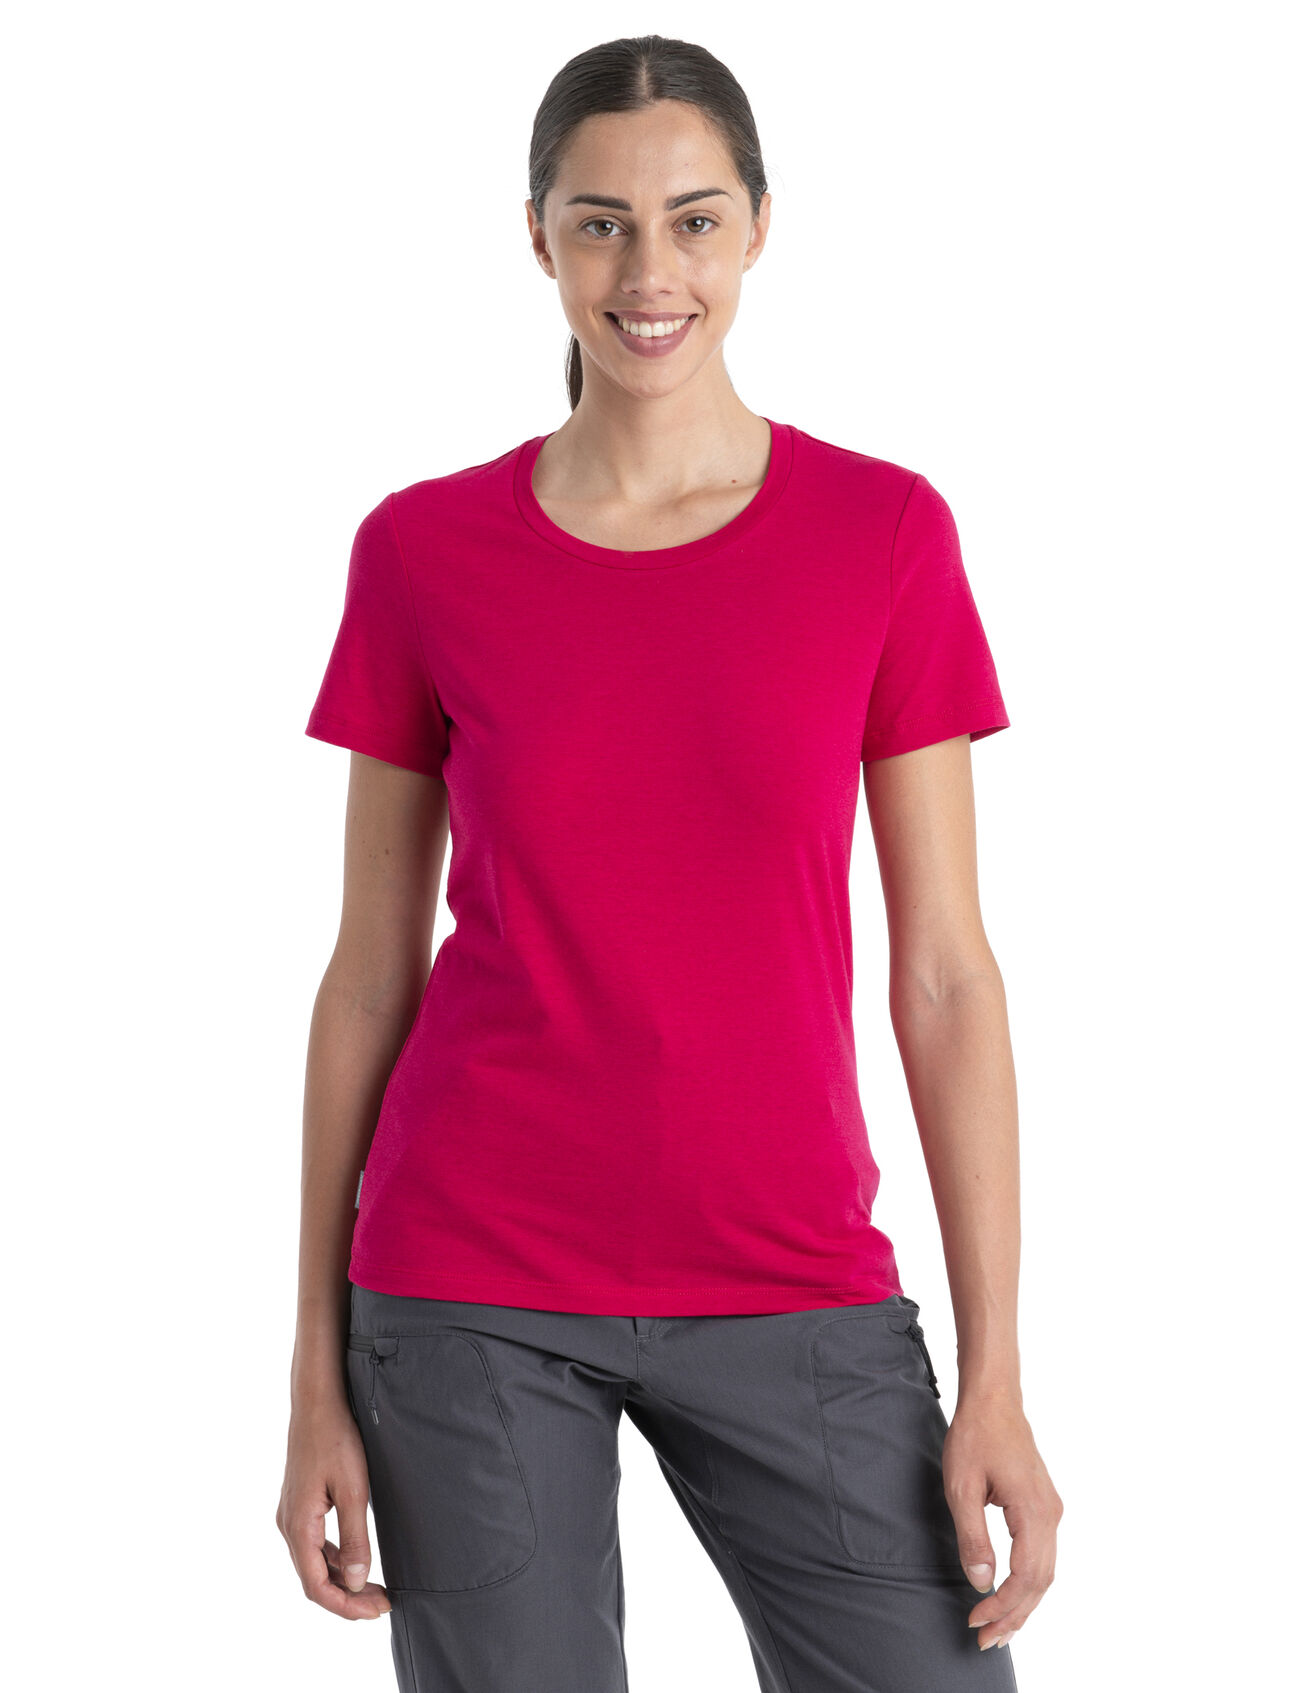 Womens Merino Central Classic Short Sleeve T-Shirt A versatile, everyday tee that goes anywhere in comfort, the Central Classic Short Sleeve Tee features a sustainable blend of natural merino wool and soft organically grown cotton. 